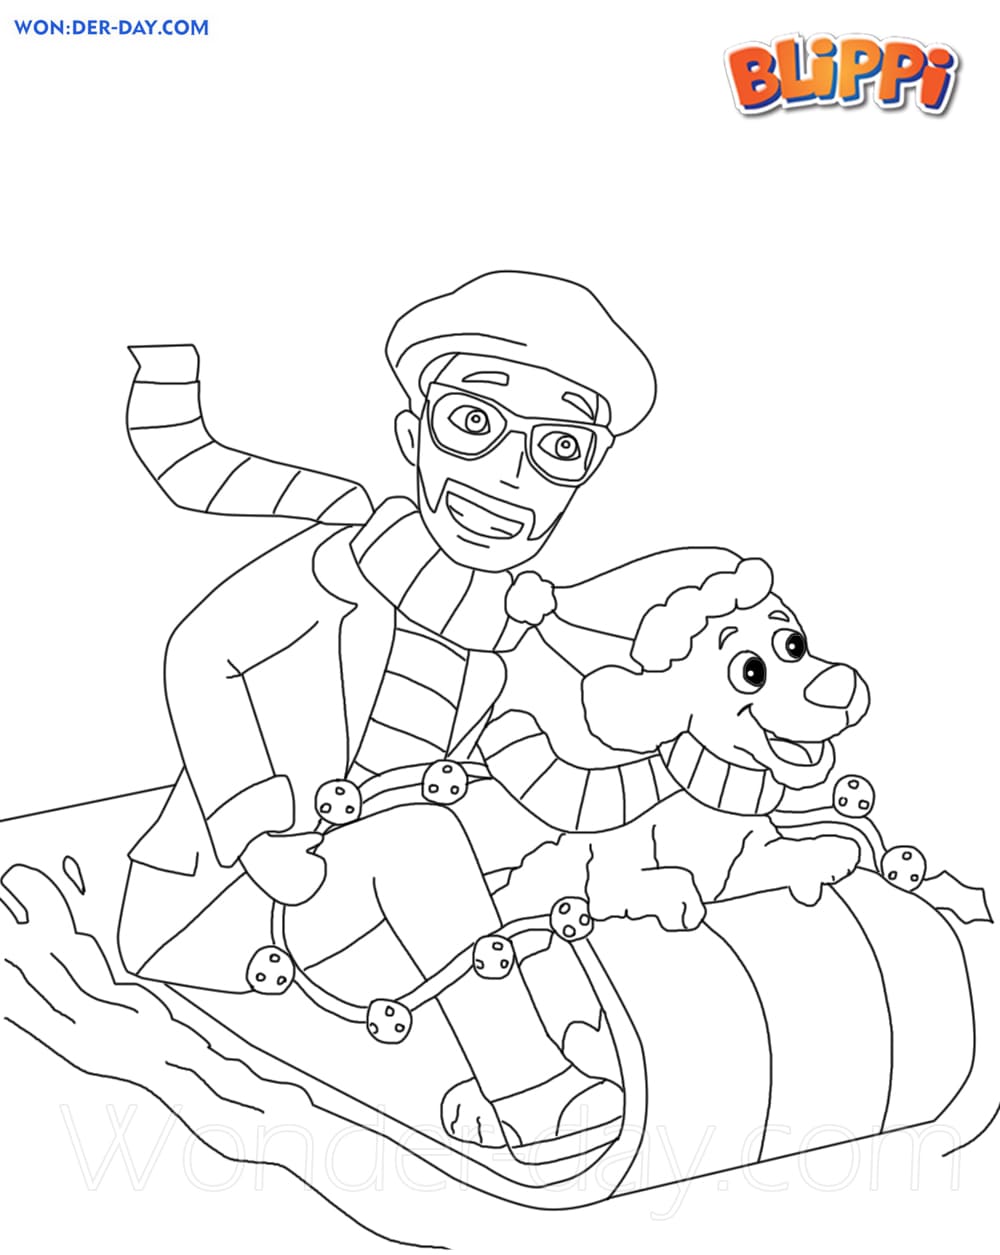 Free Printable Blippi Coloring Pages ...